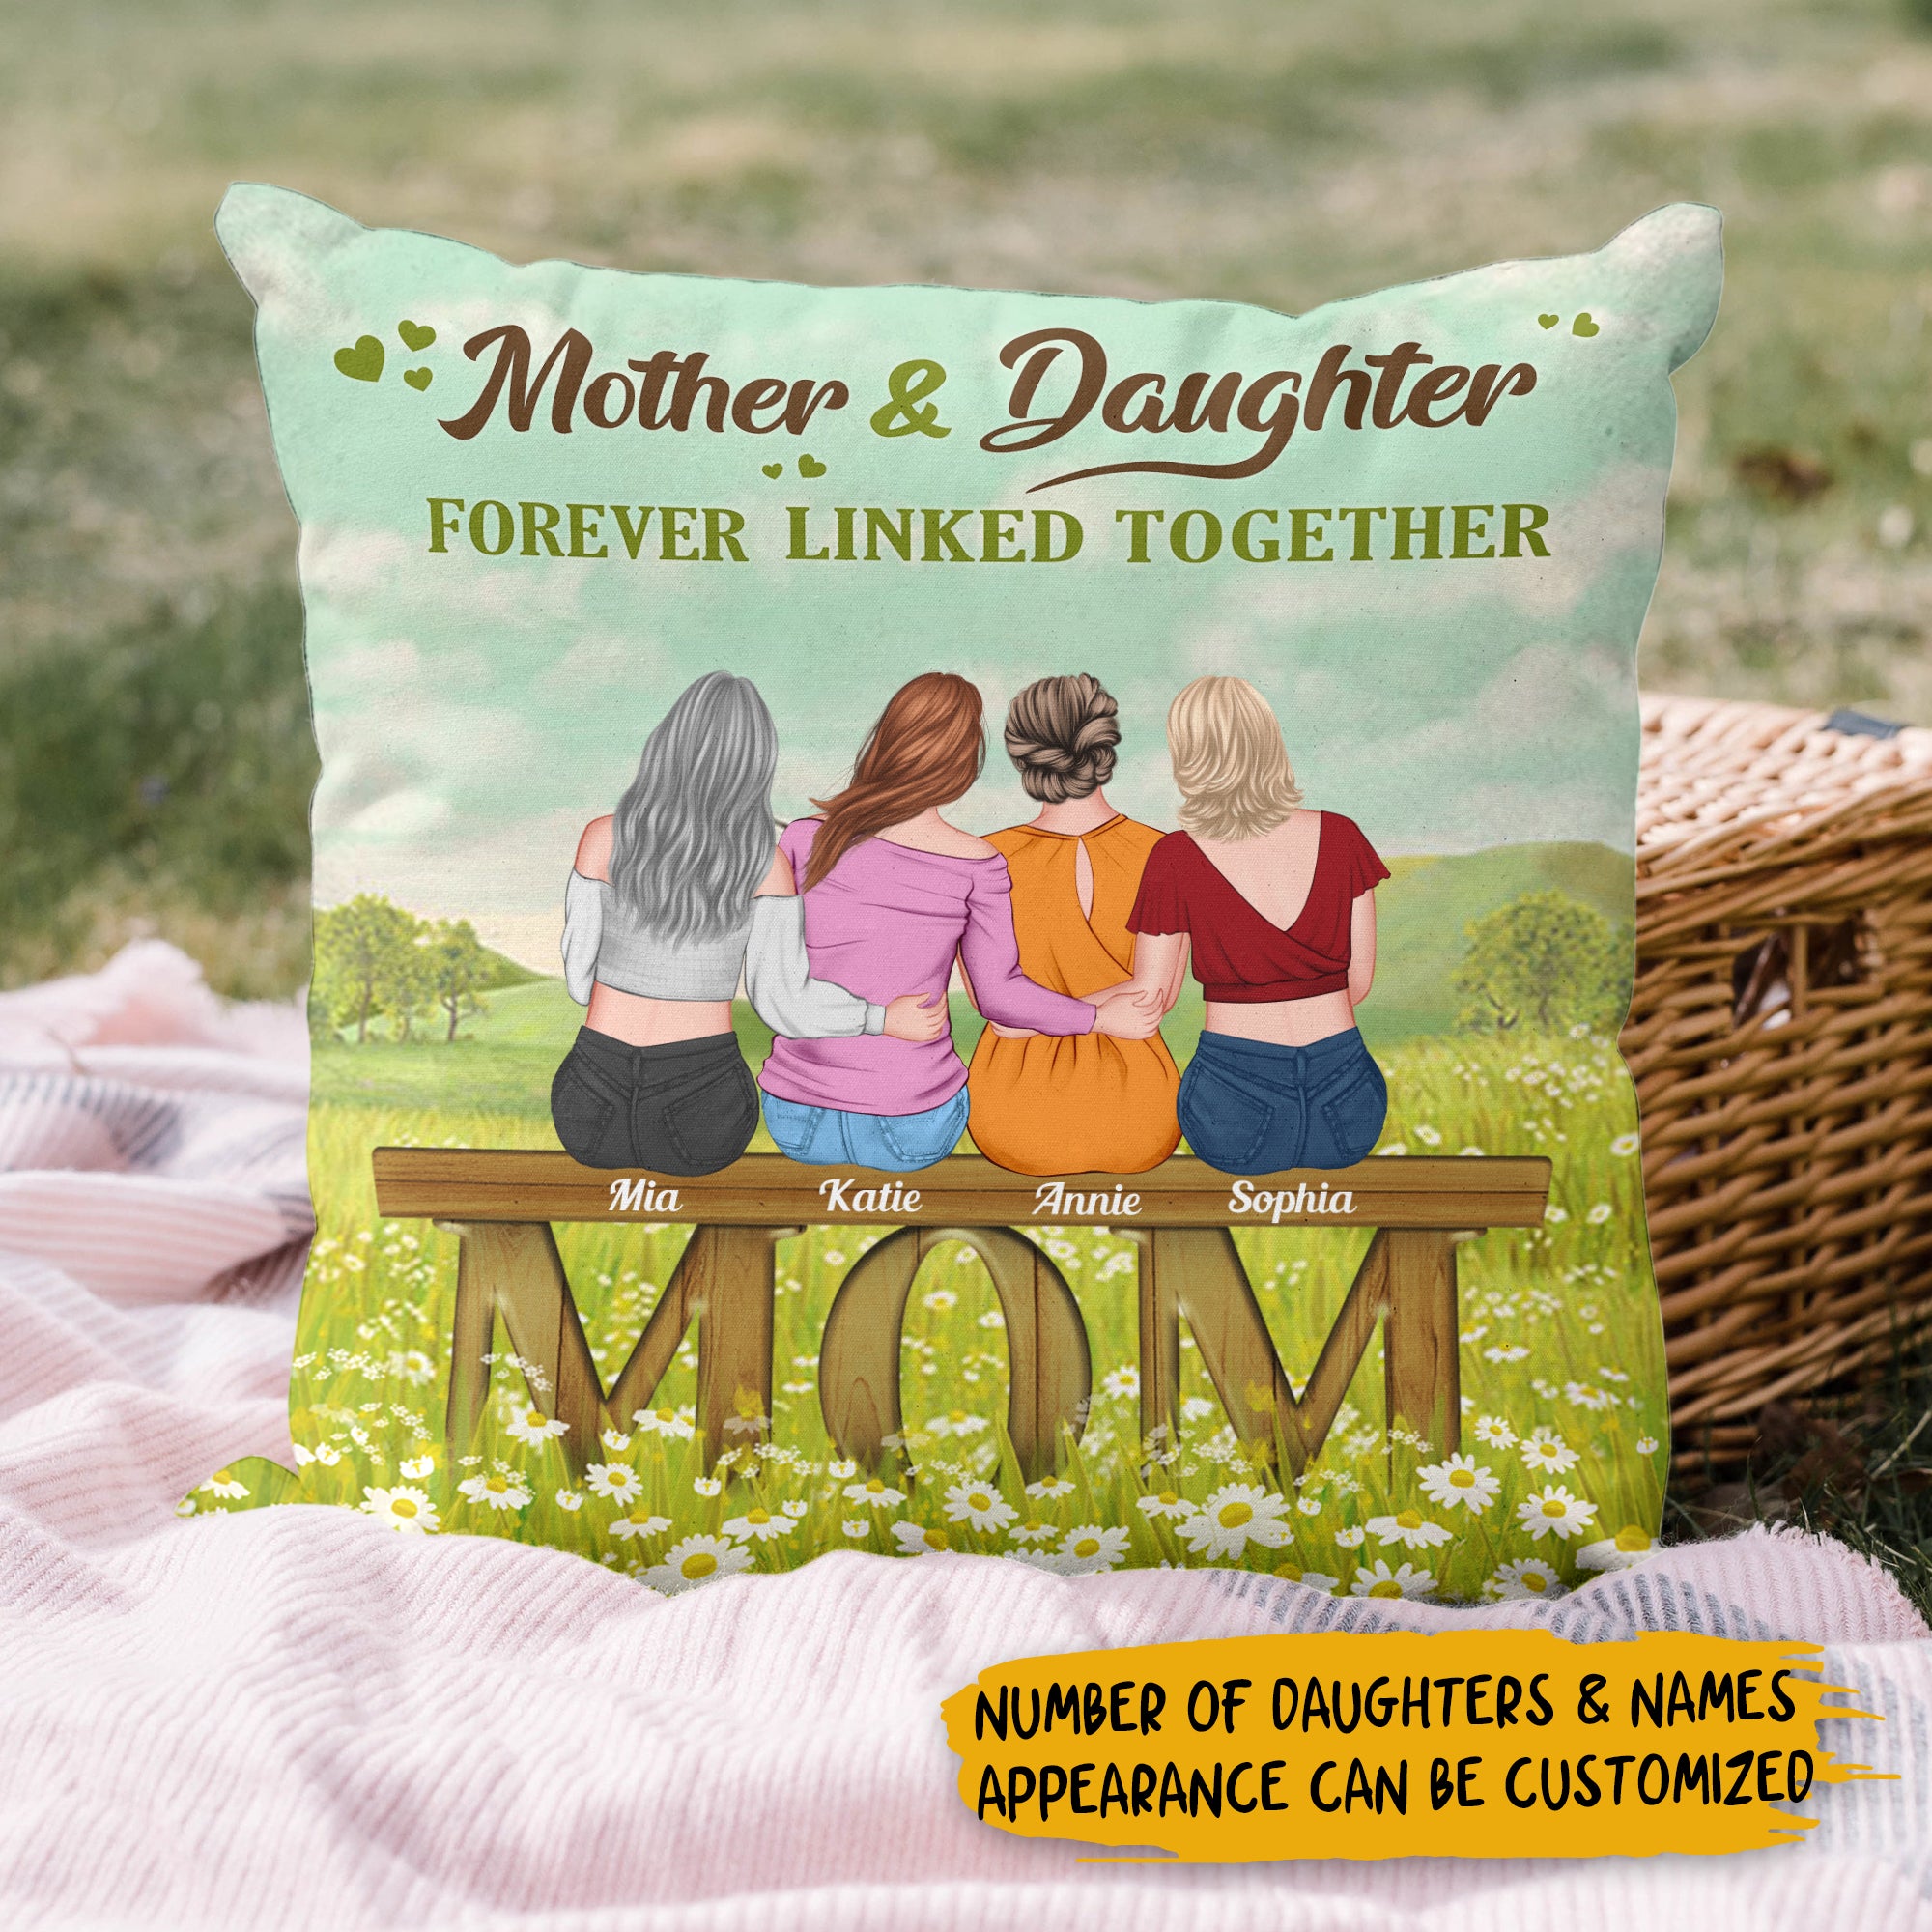 Personalized Pillow Case - Mother & Daughter Forever Linked Together